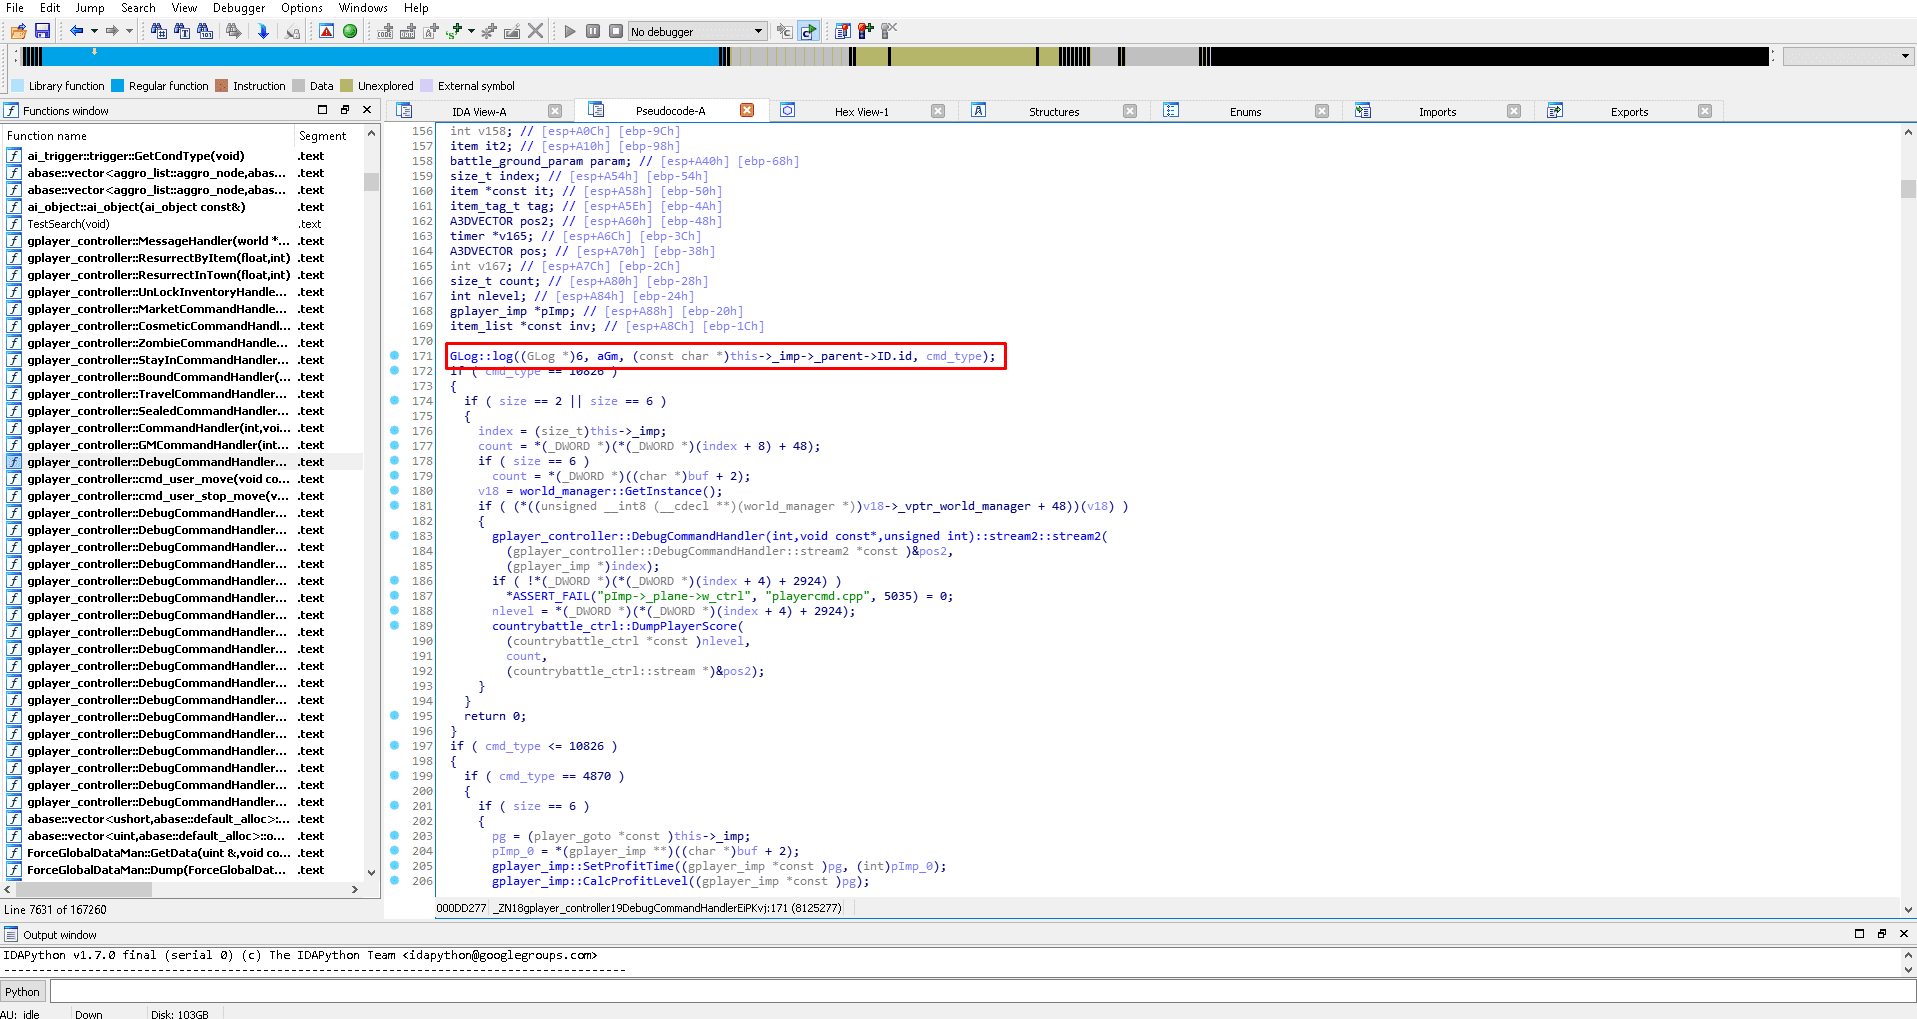 XyTKki0 - Enabling debug console only for a unique roleid - RaGEZONE Forums